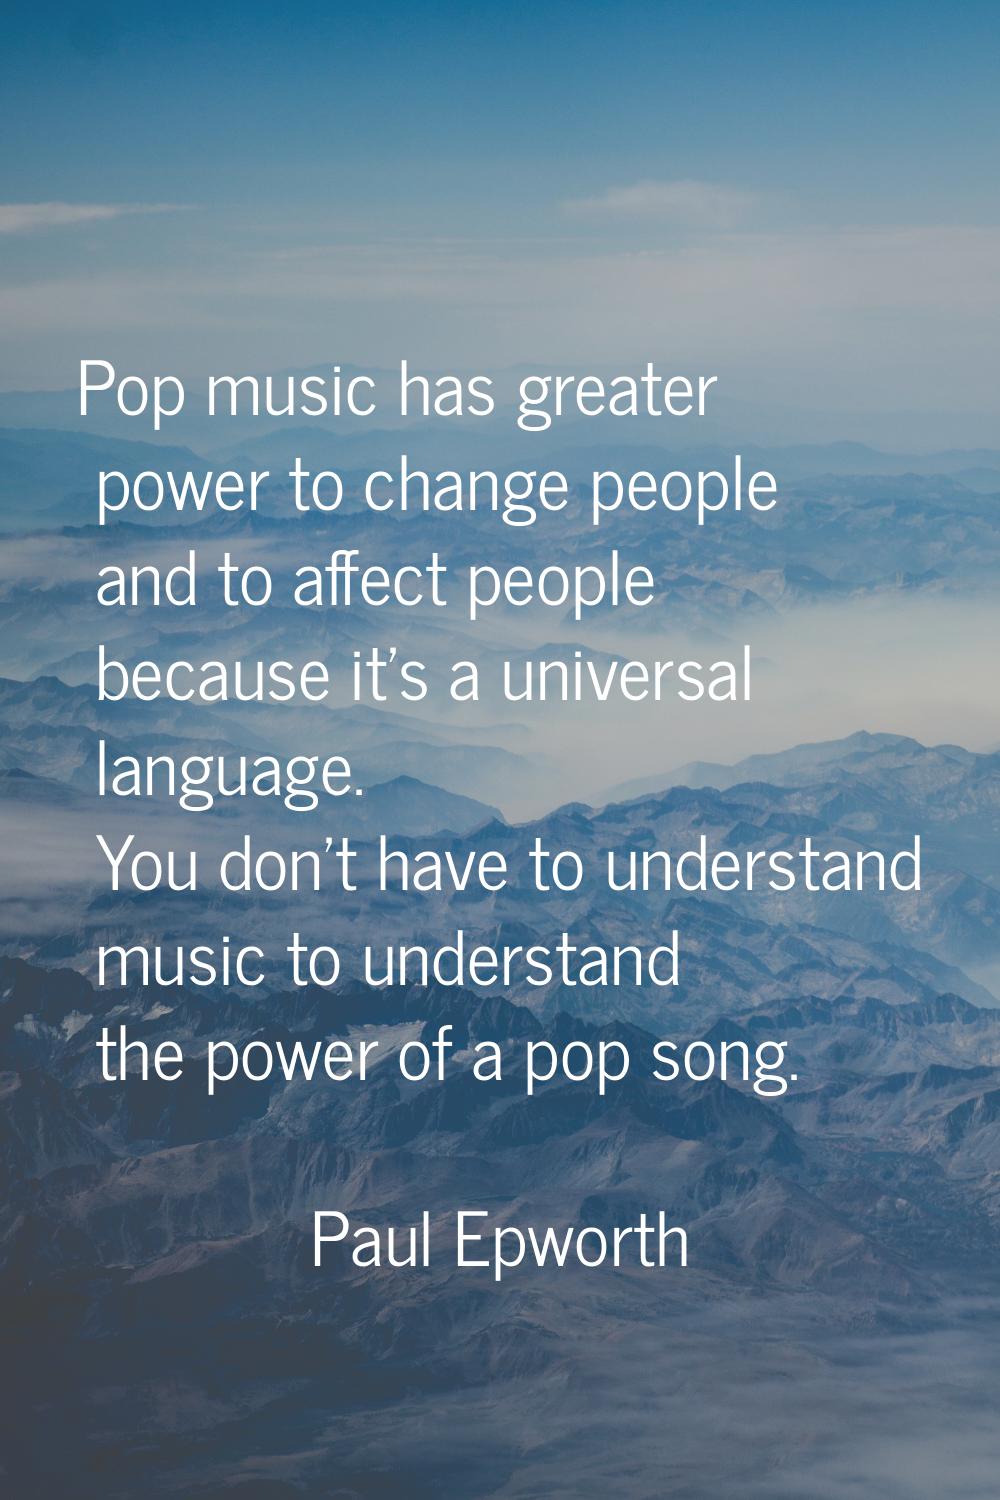 Pop music has greater power to change people and to affect people because it's a universal language